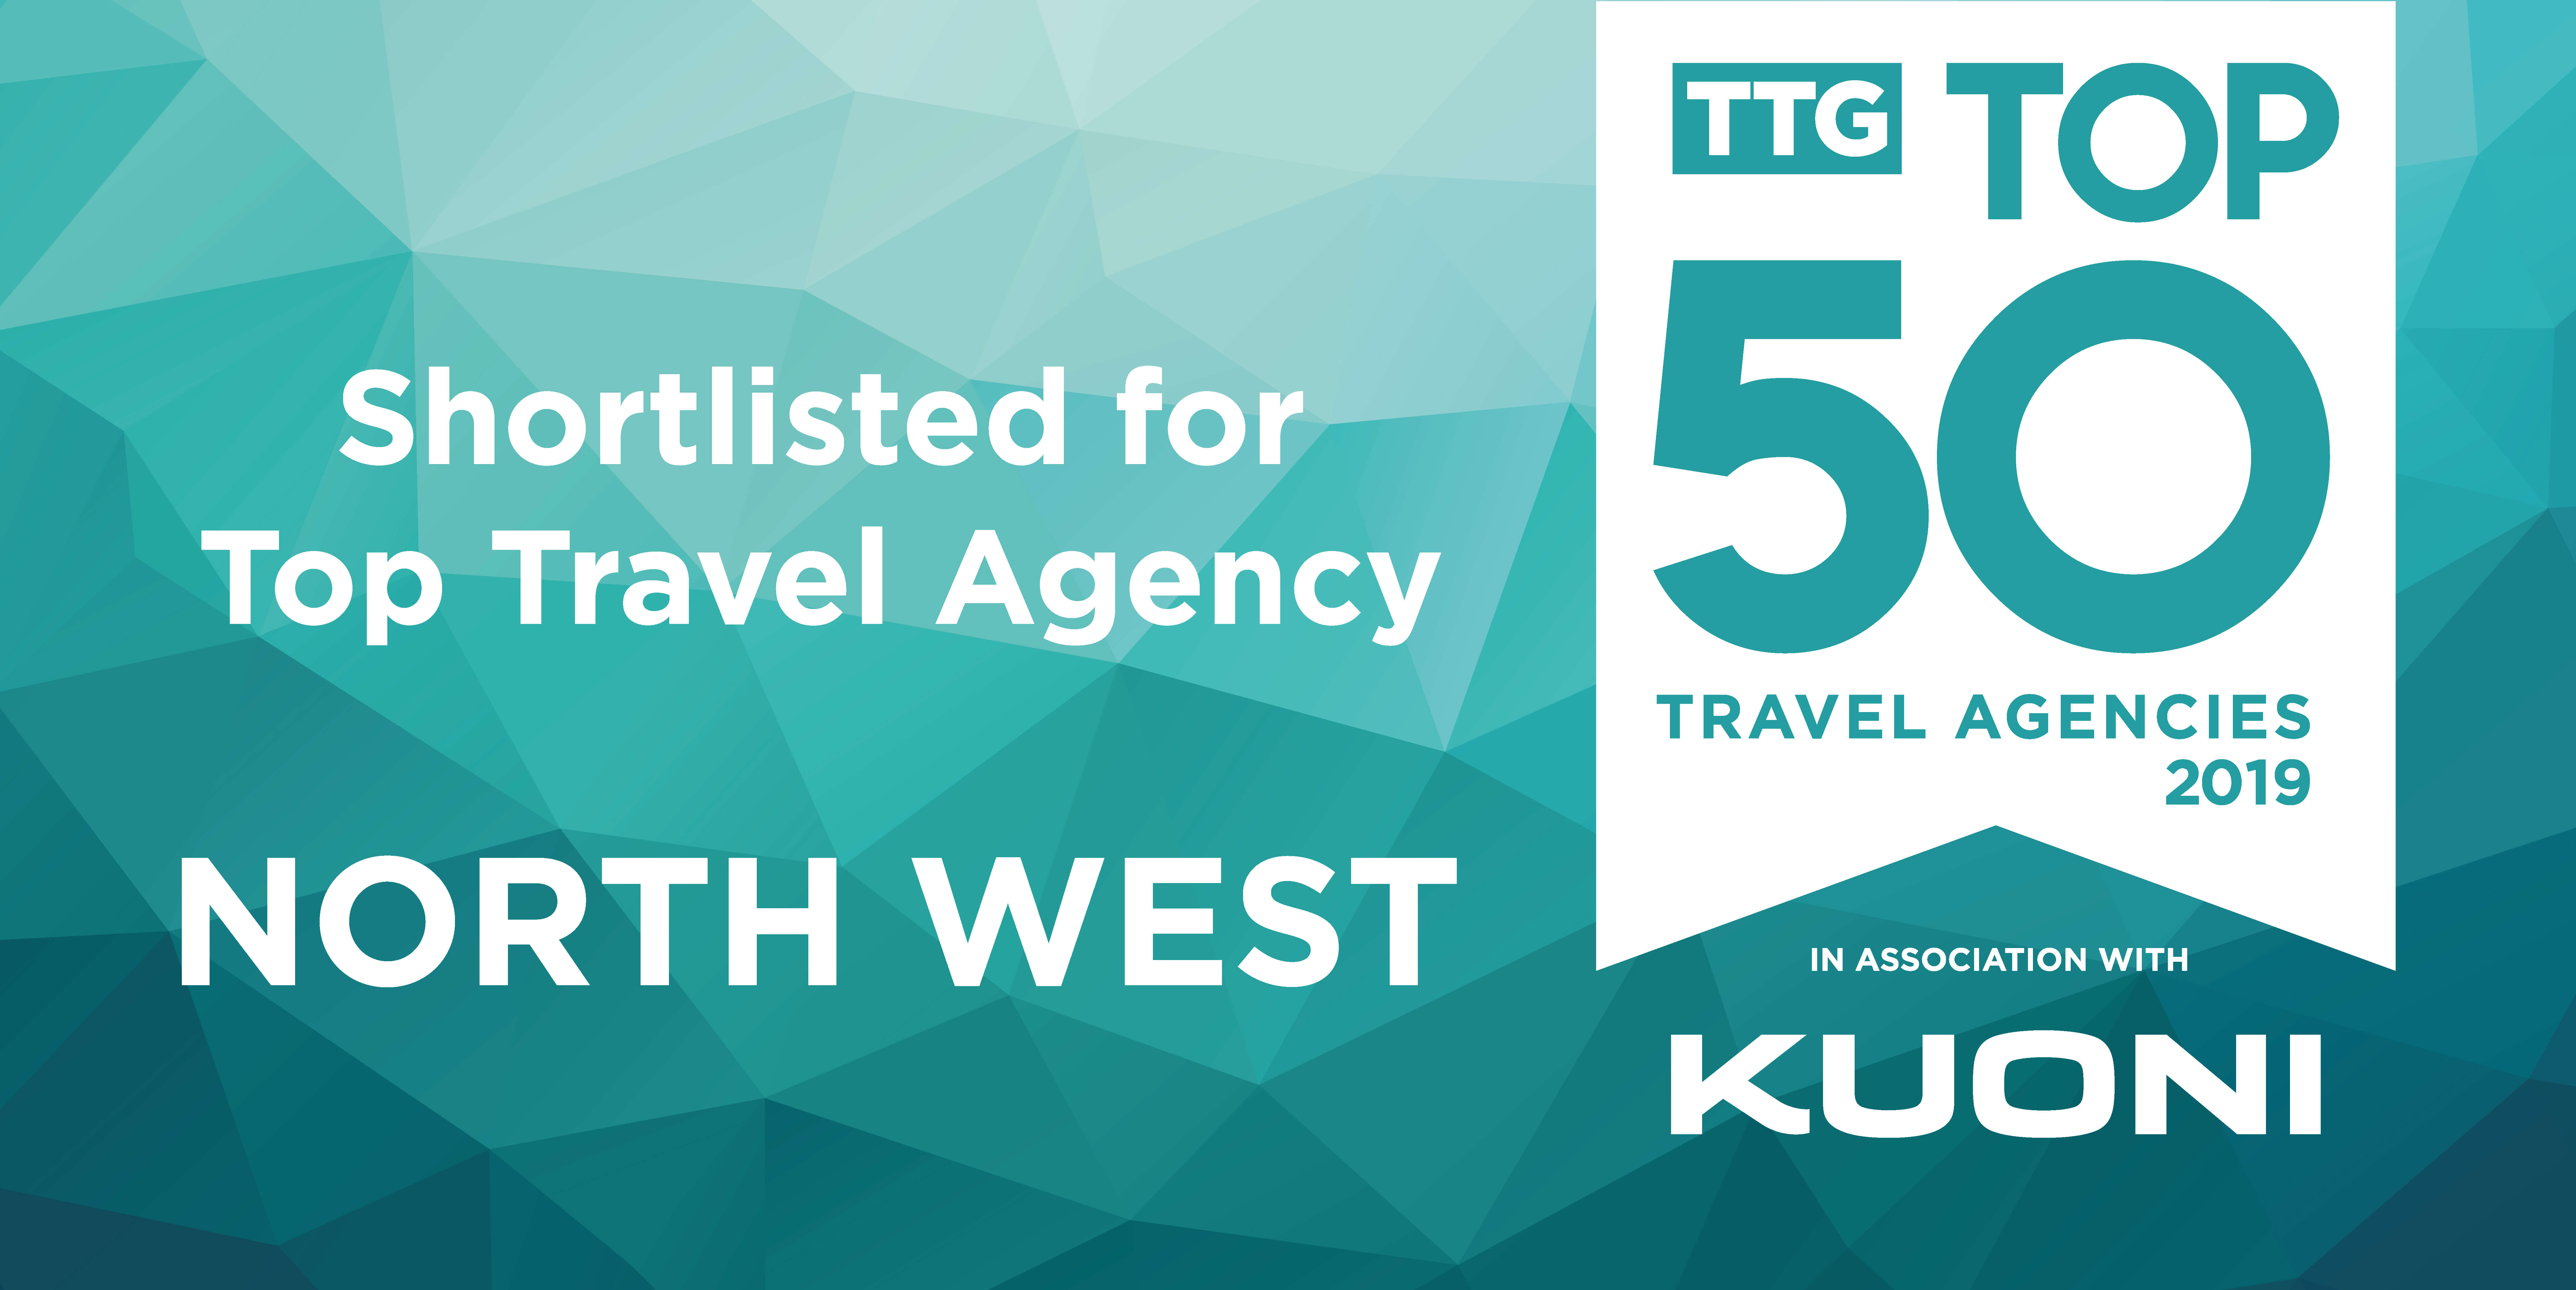 tui travel agents wirral